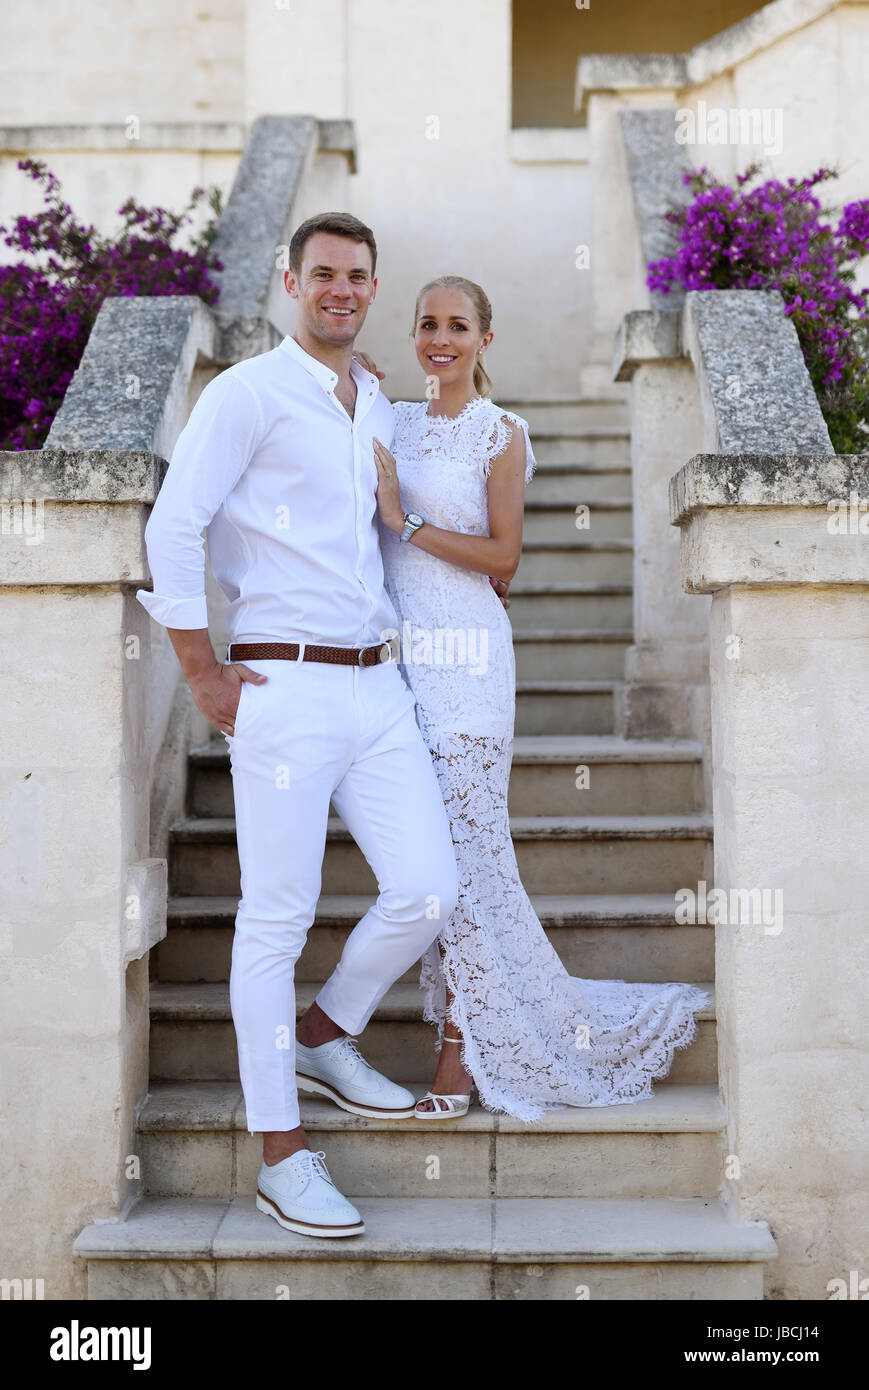 Monopoli, Italy. 10th June, 2017. HANDOUT - A handout picture made available on 10 June 2017 shows German soccer national player and German Bundesliga goalkeeper of the FC Bayern Munich, Manuel Neuer, and his wife Nina Neuer (née Weiss) shortly after the church wedding in Monopoli, Italy, 10 June 2017. (ATTENTION EDITORS: FOR EDITORIAL USE ONLY IN CONNECTION WITH CURRENT REPORTING/ MANDATORY CREDIT) · NO WIRE SERVICE · Photo: Pia Clodi/peachesandmint.com/dpa/Alamy Live News Stock Photo